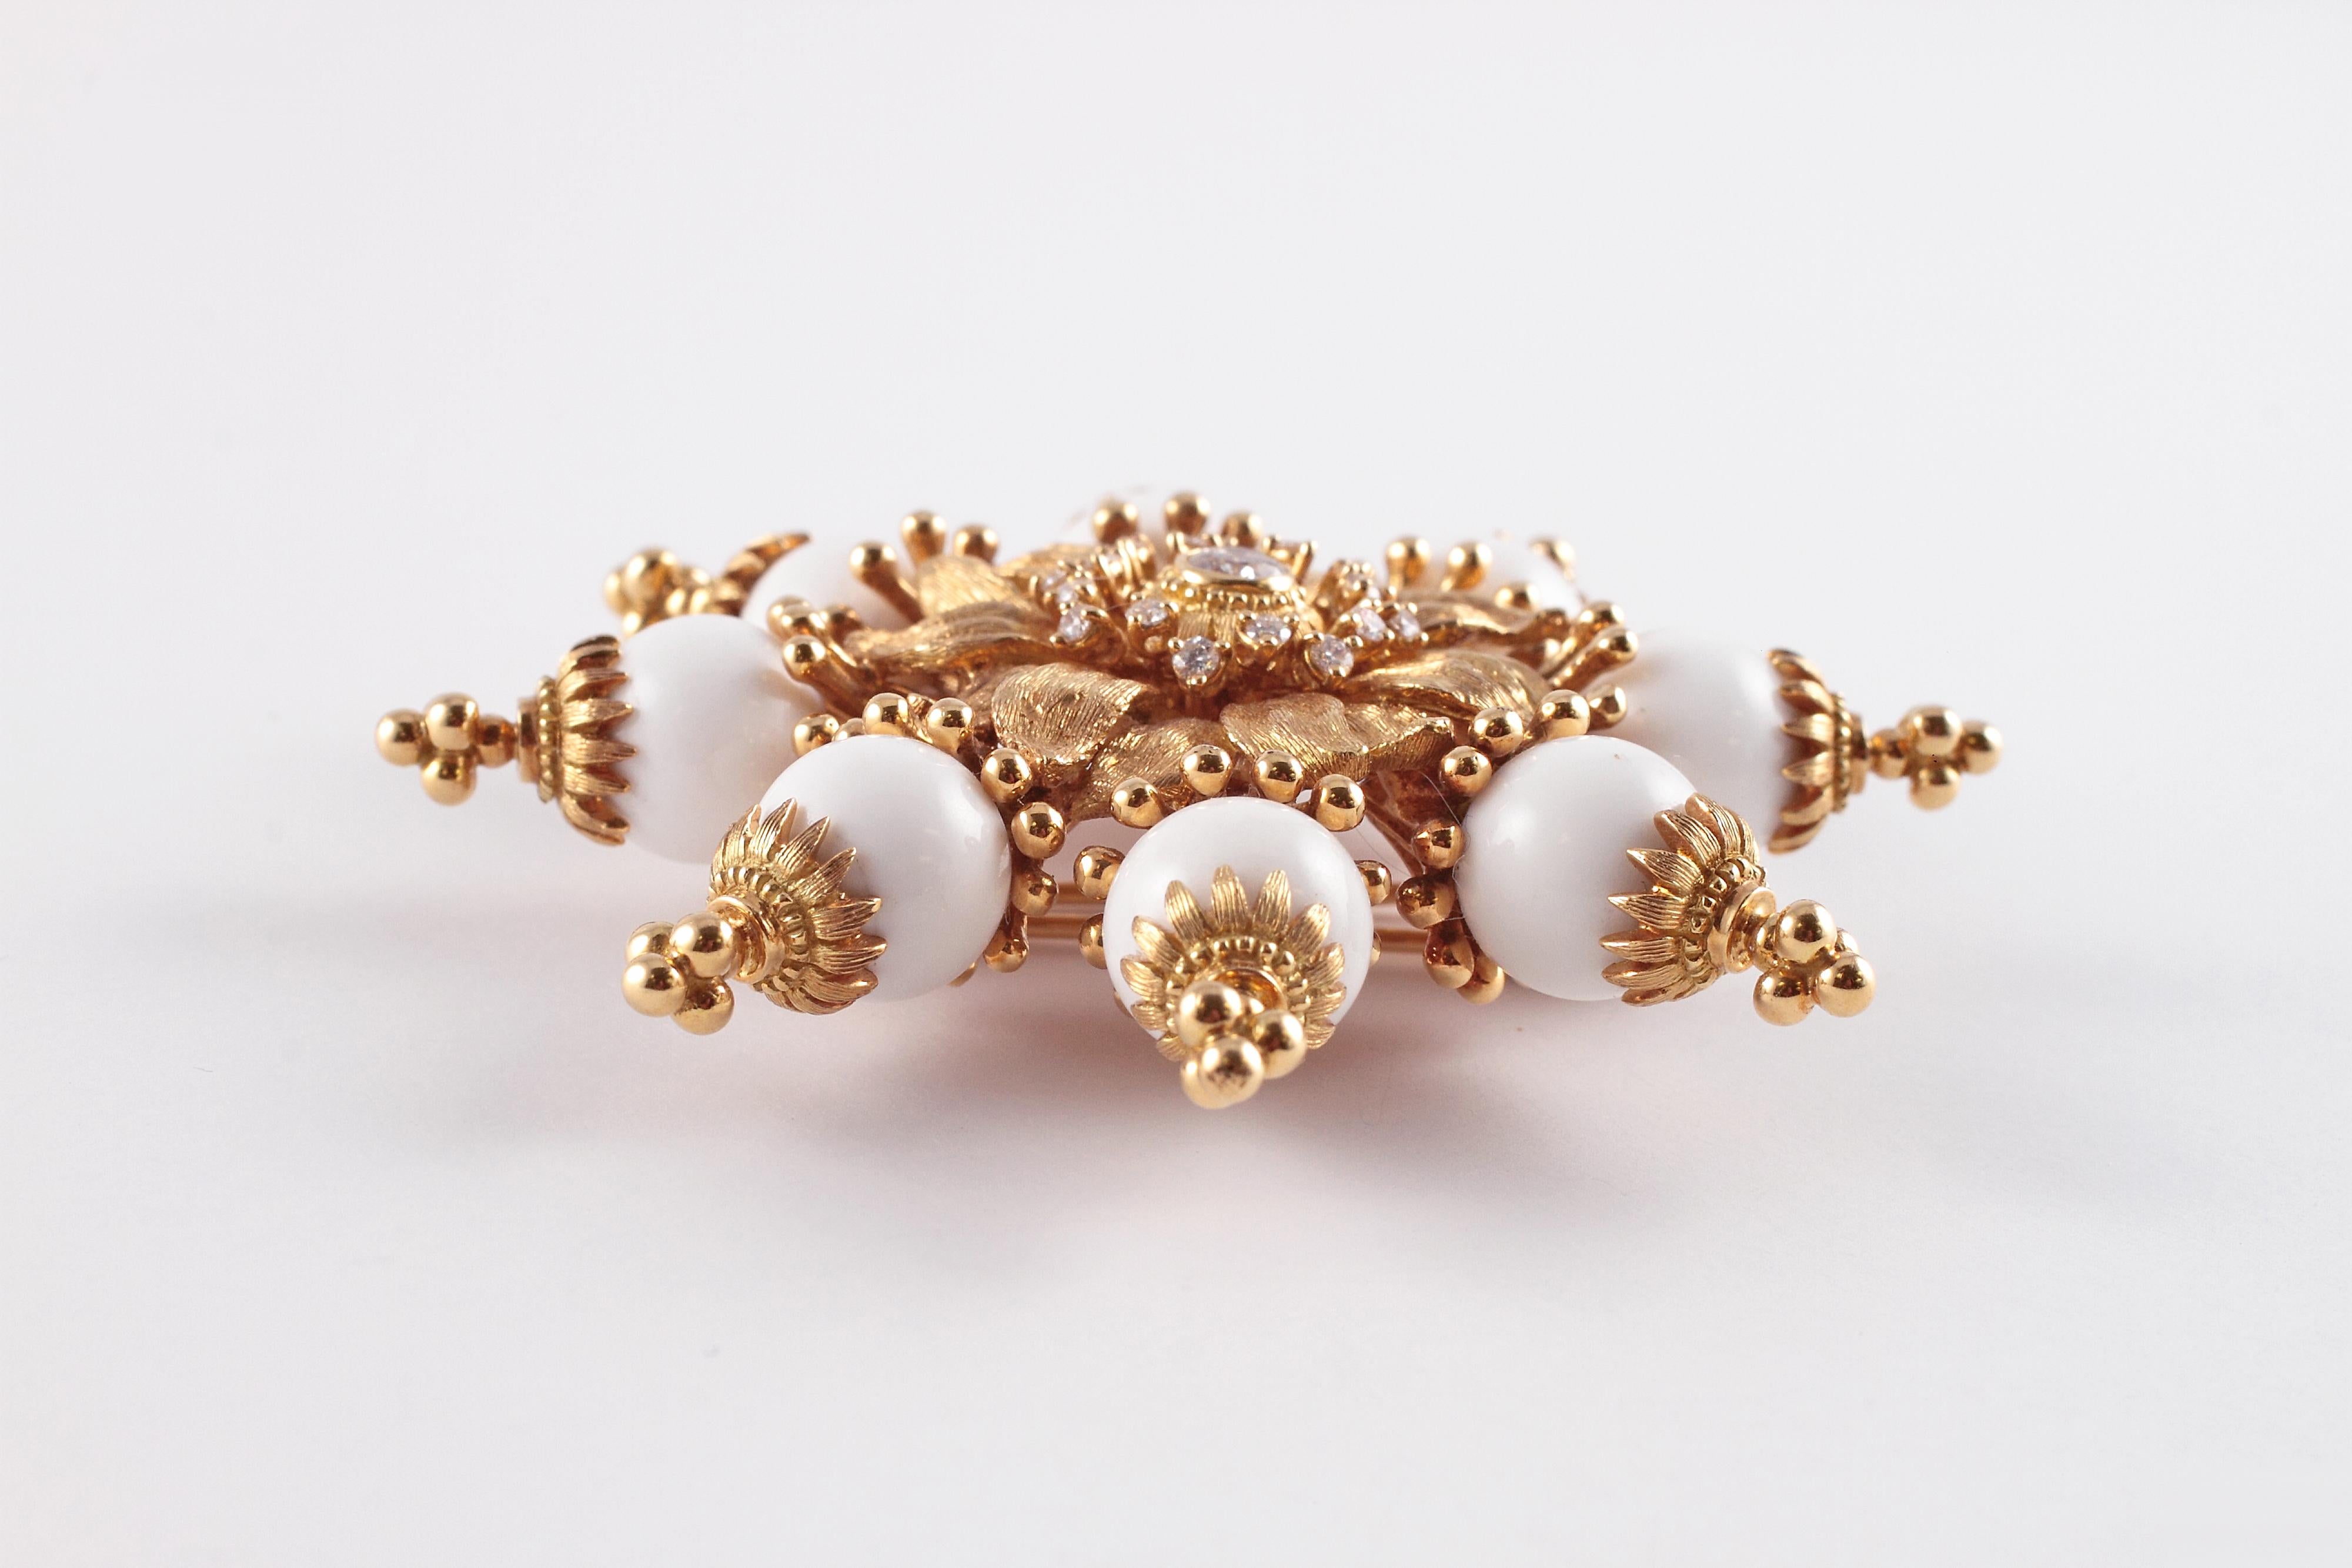 So many options with this  Robert Bielka brooch!  The main brooch is in 18 karat yellow gold and features 0.60 carats of diamonds in the center.  The beads are all interchangeable for such a diverse look and the item is secured with a double pin